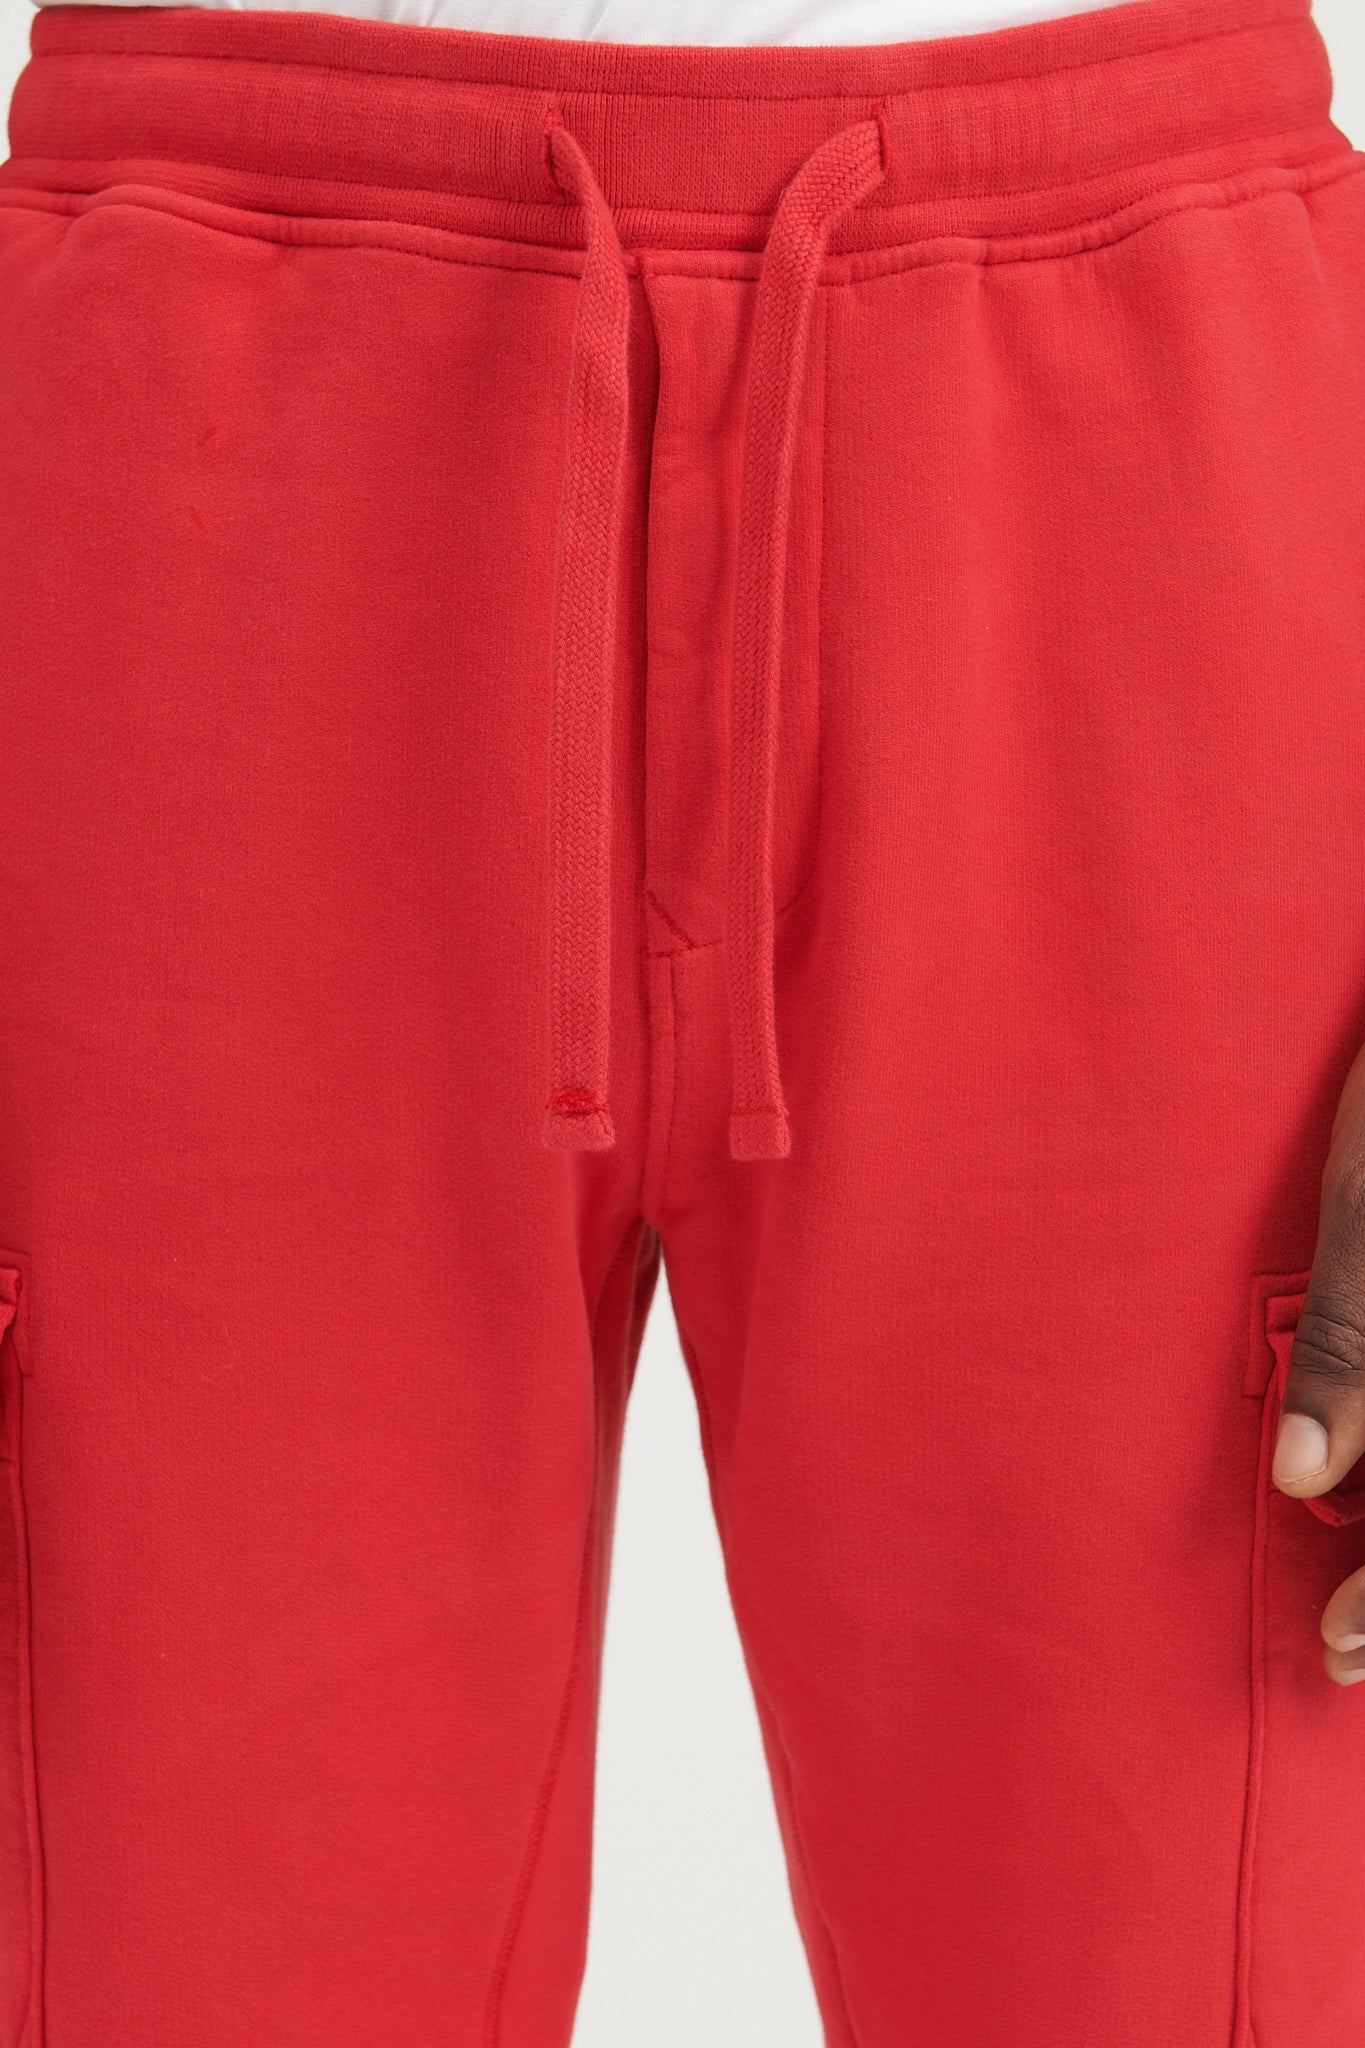 64720 Brushed Cotton Fleece Cargo Jogger Sweat Pants - Red